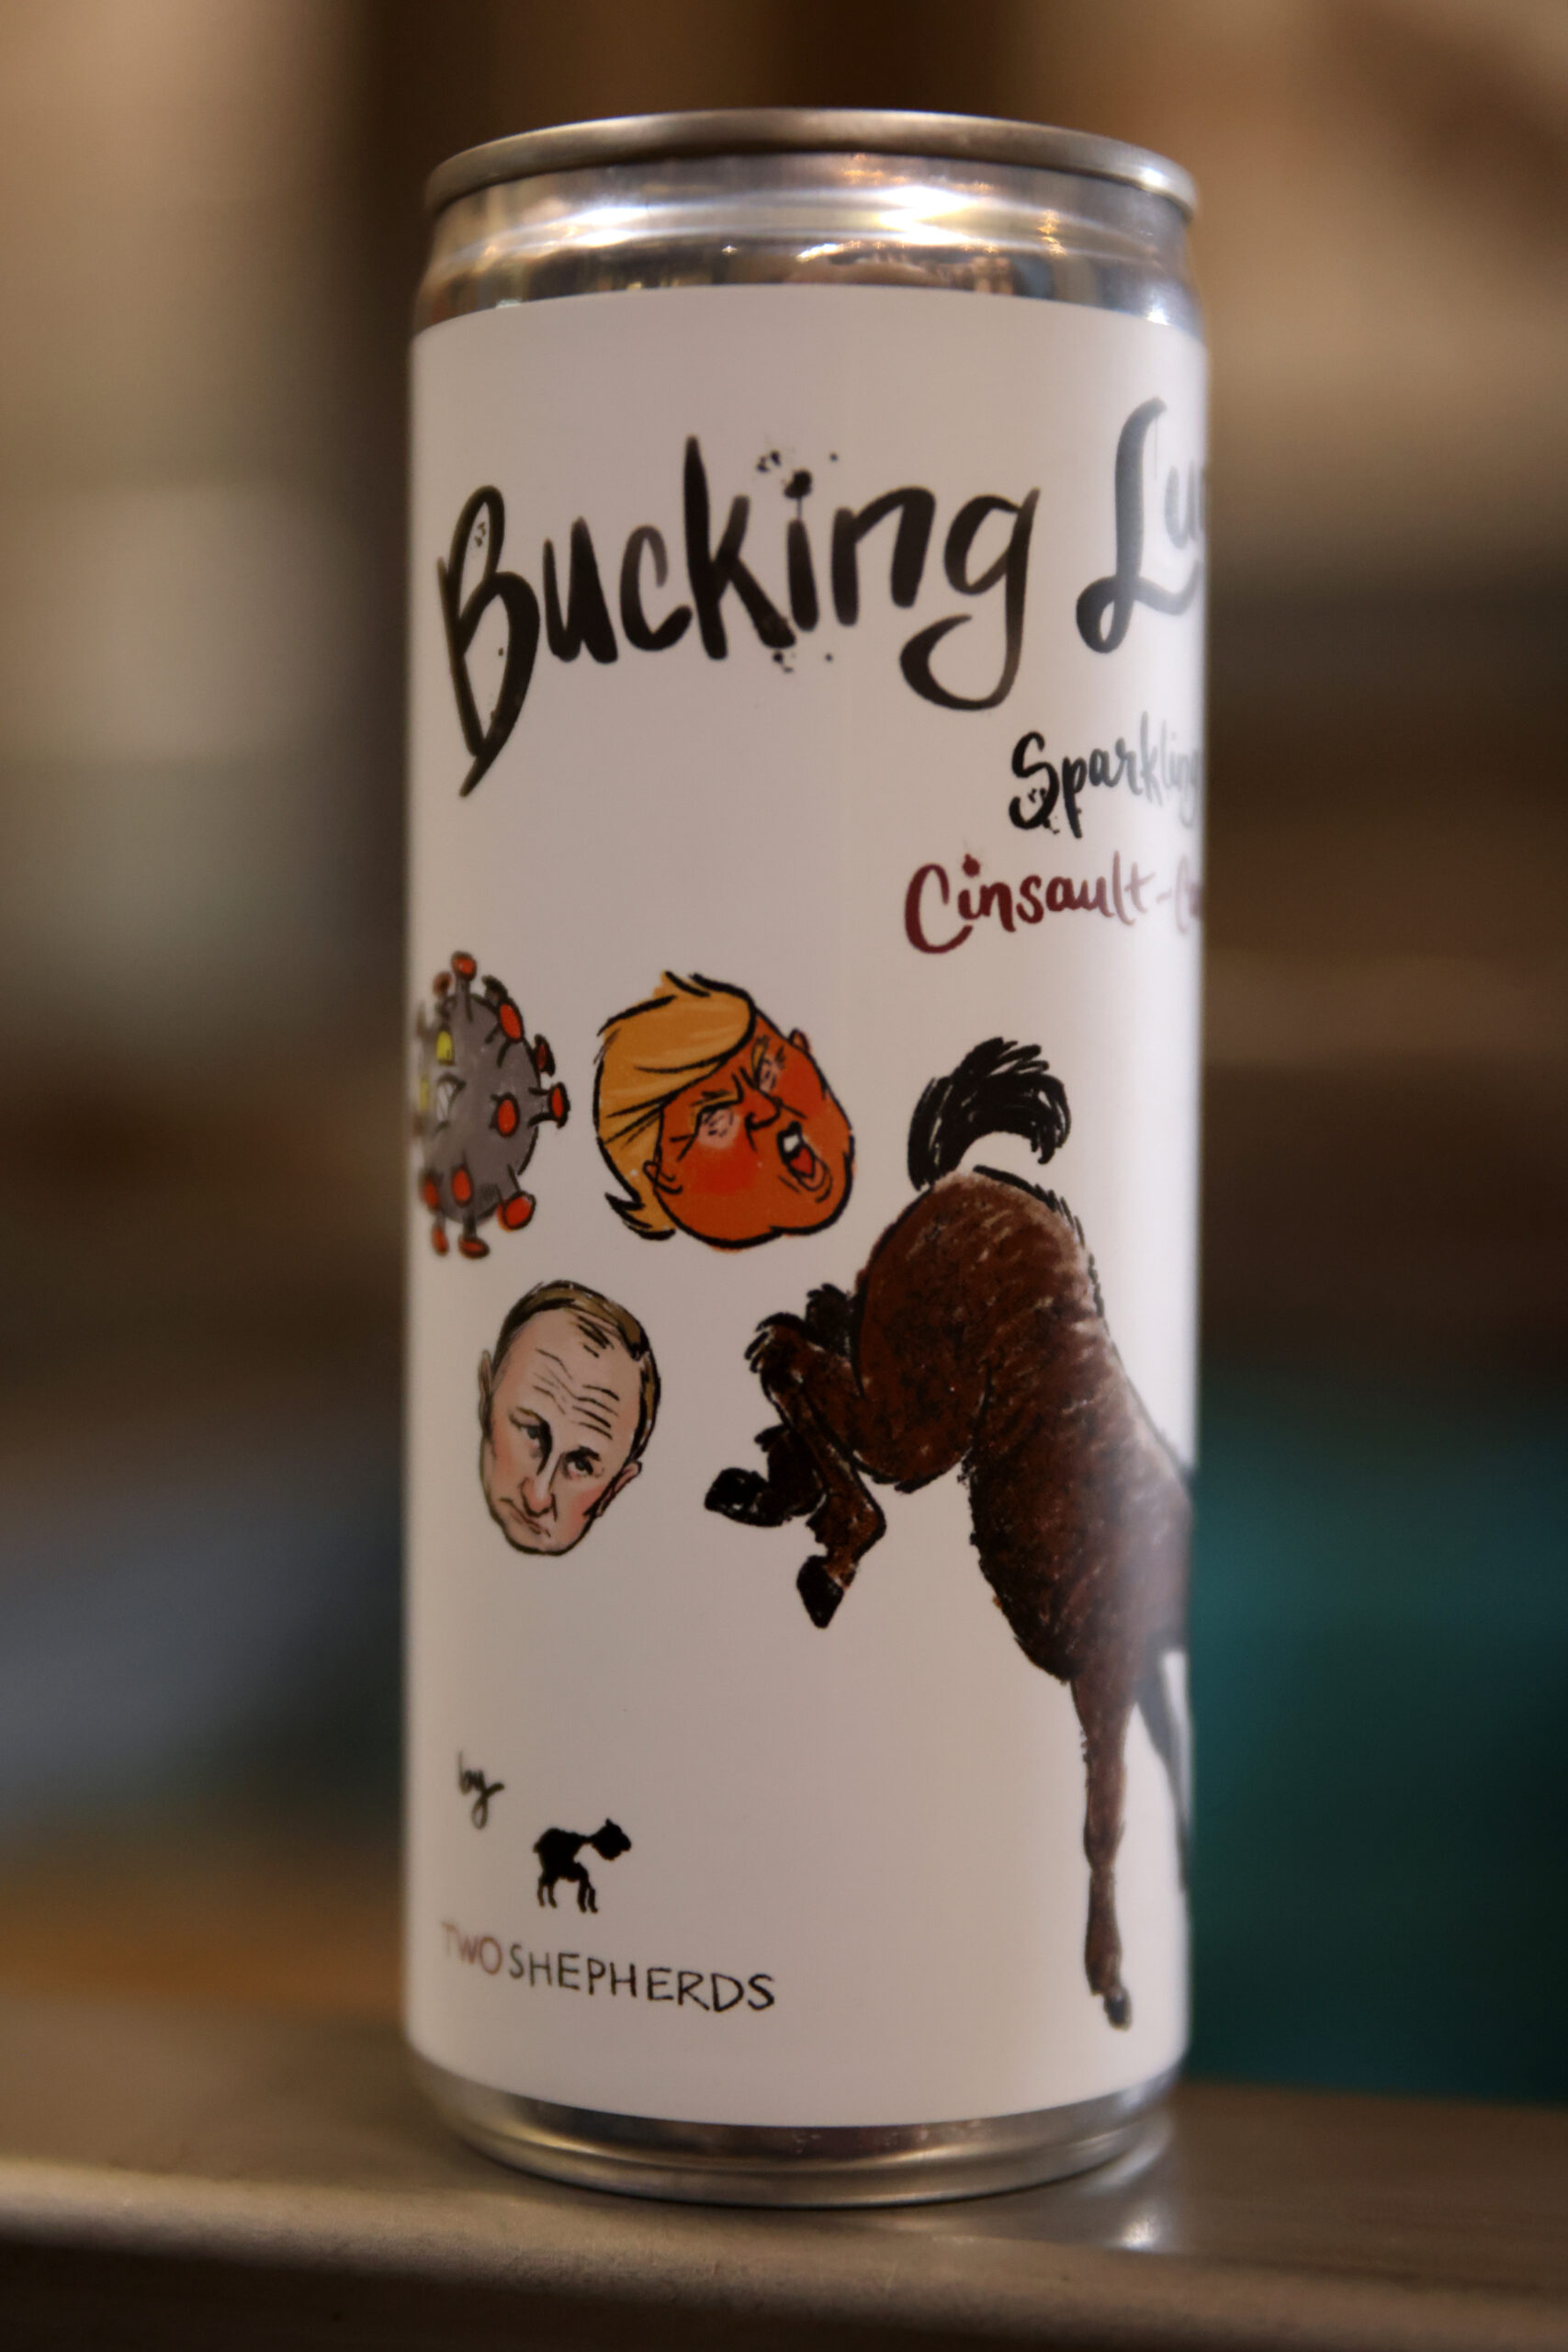 A can of "Bucking Luna" sparkling Cinsault-Carignan at Two Shepherds in Windsor, Calif. on Tuesday, May 31, 2022. (Beth Schlanker/The Press Democrat)